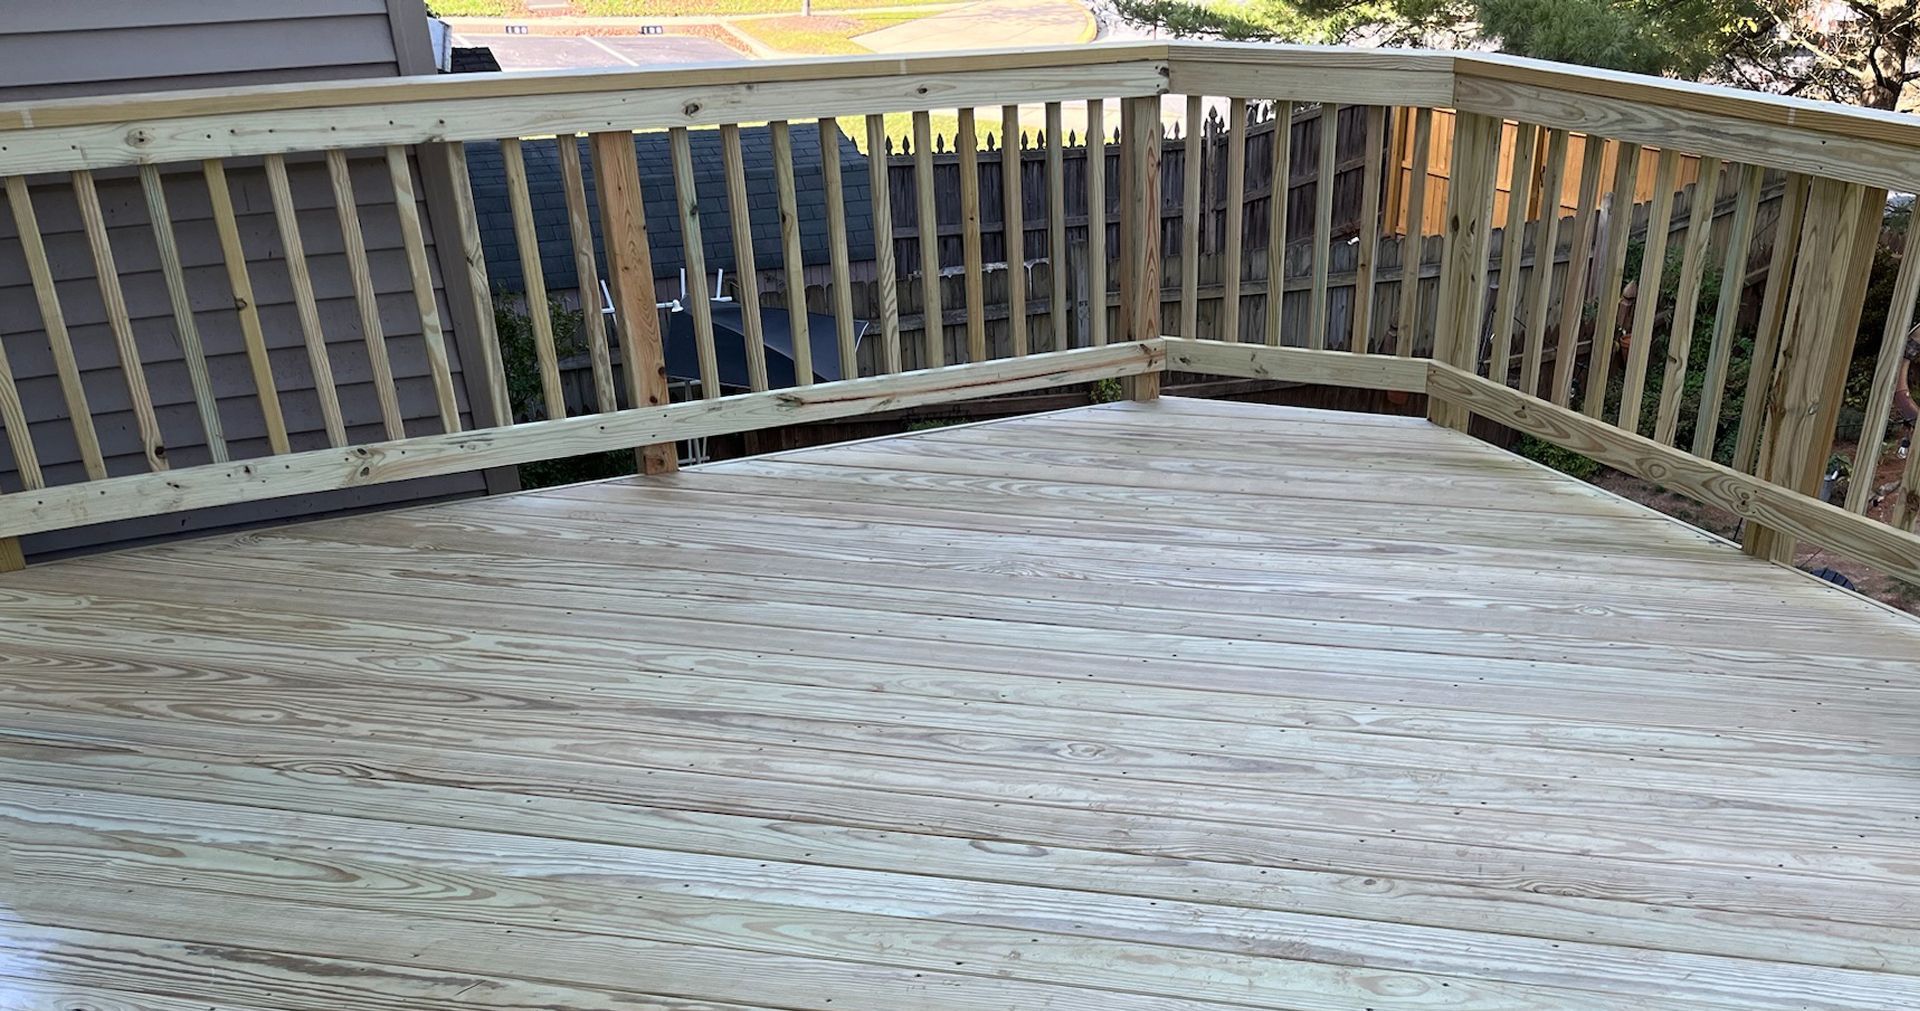 An empty deck with a wooden railing and a fence.